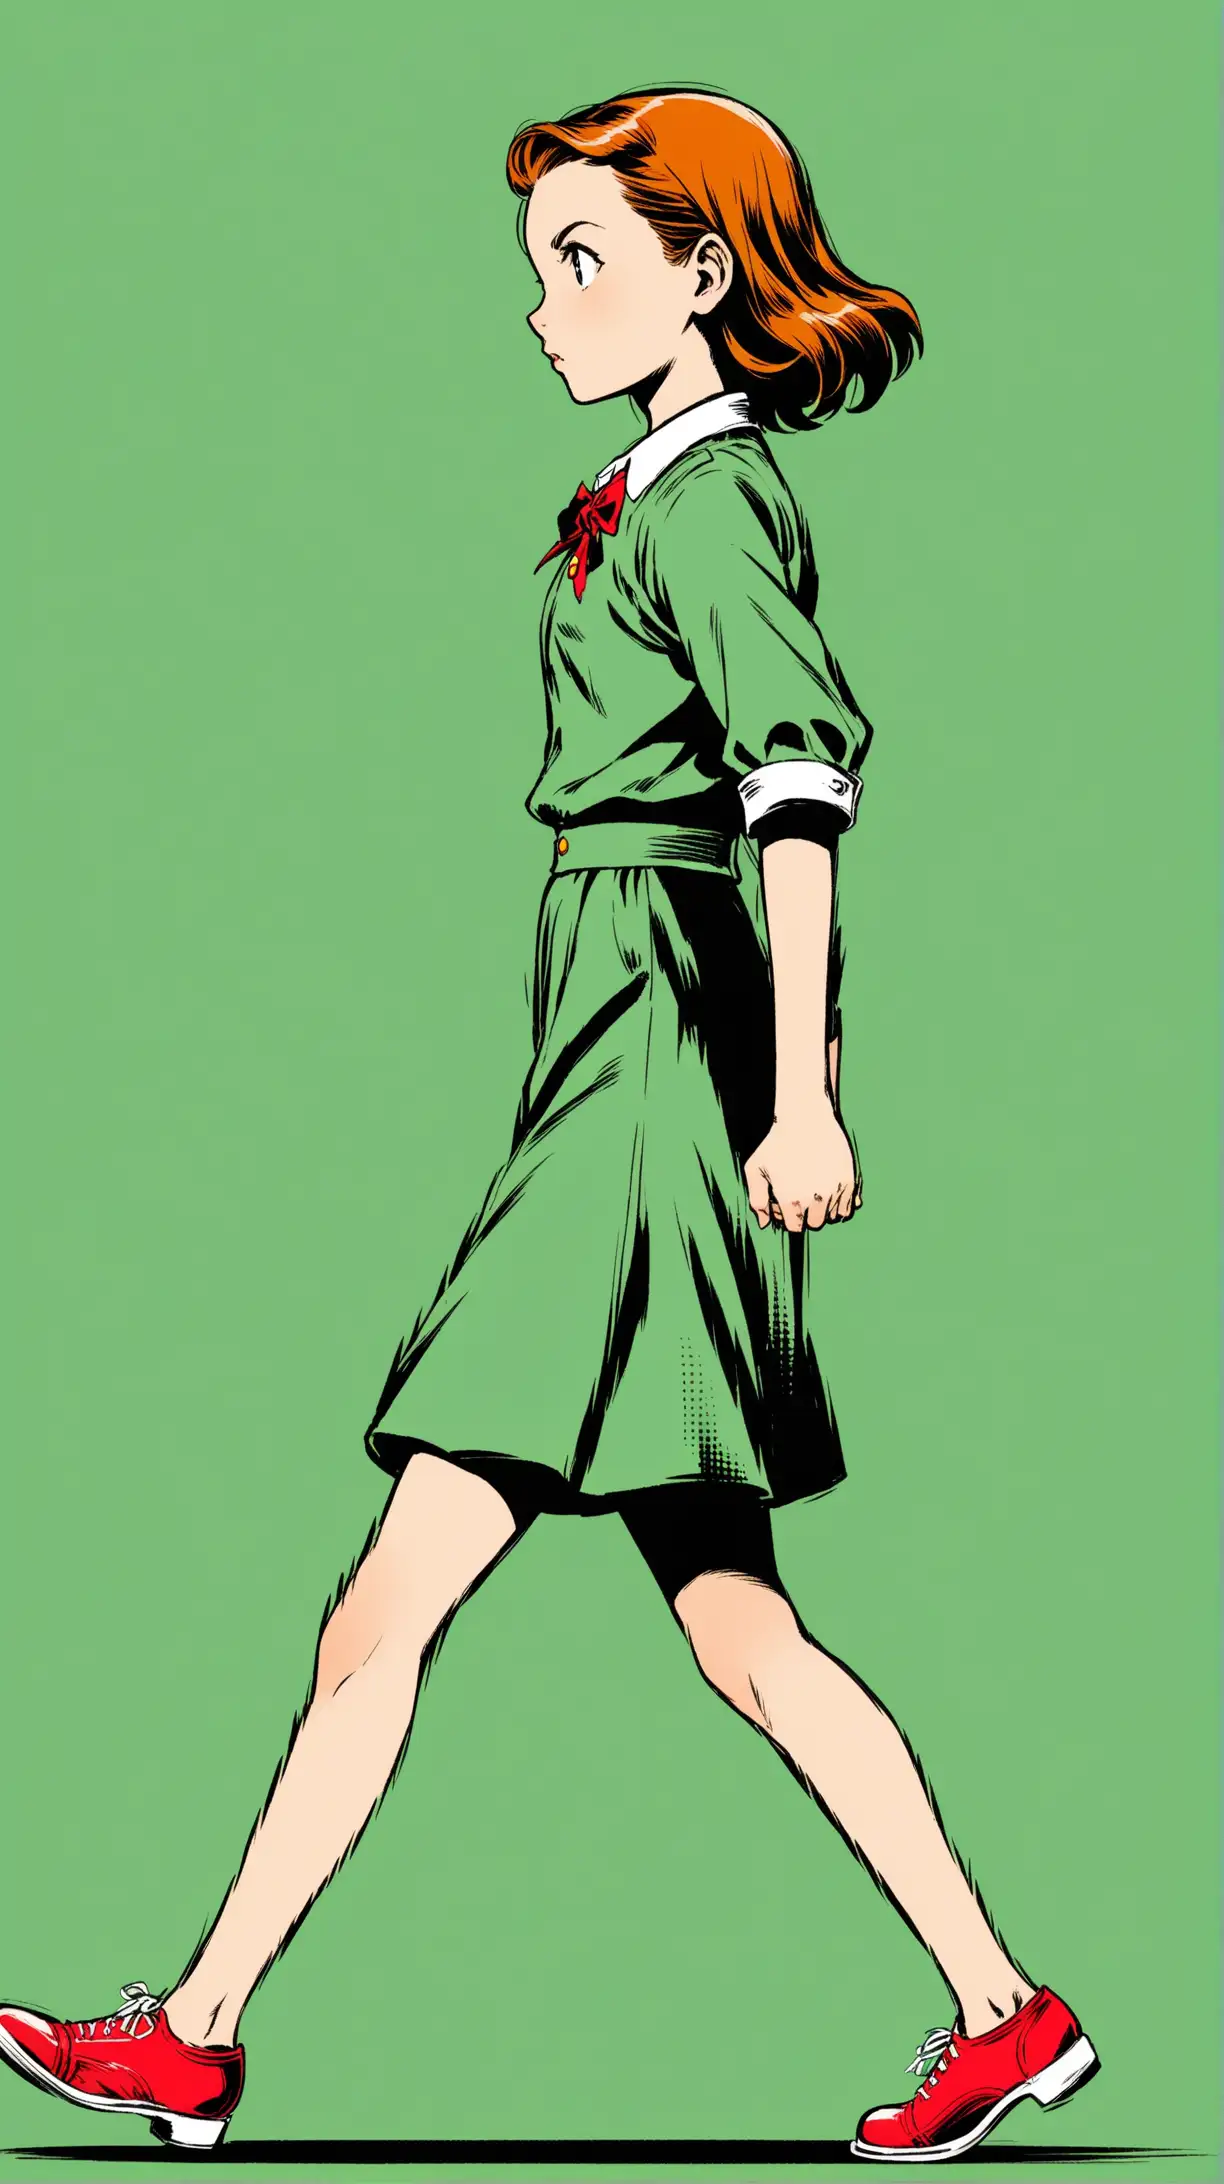 Comic book style. Full profile from the side.  A 1940s casually dressed intense looking, 12 year old girl, mid stride in a determined walk.  Full body. 